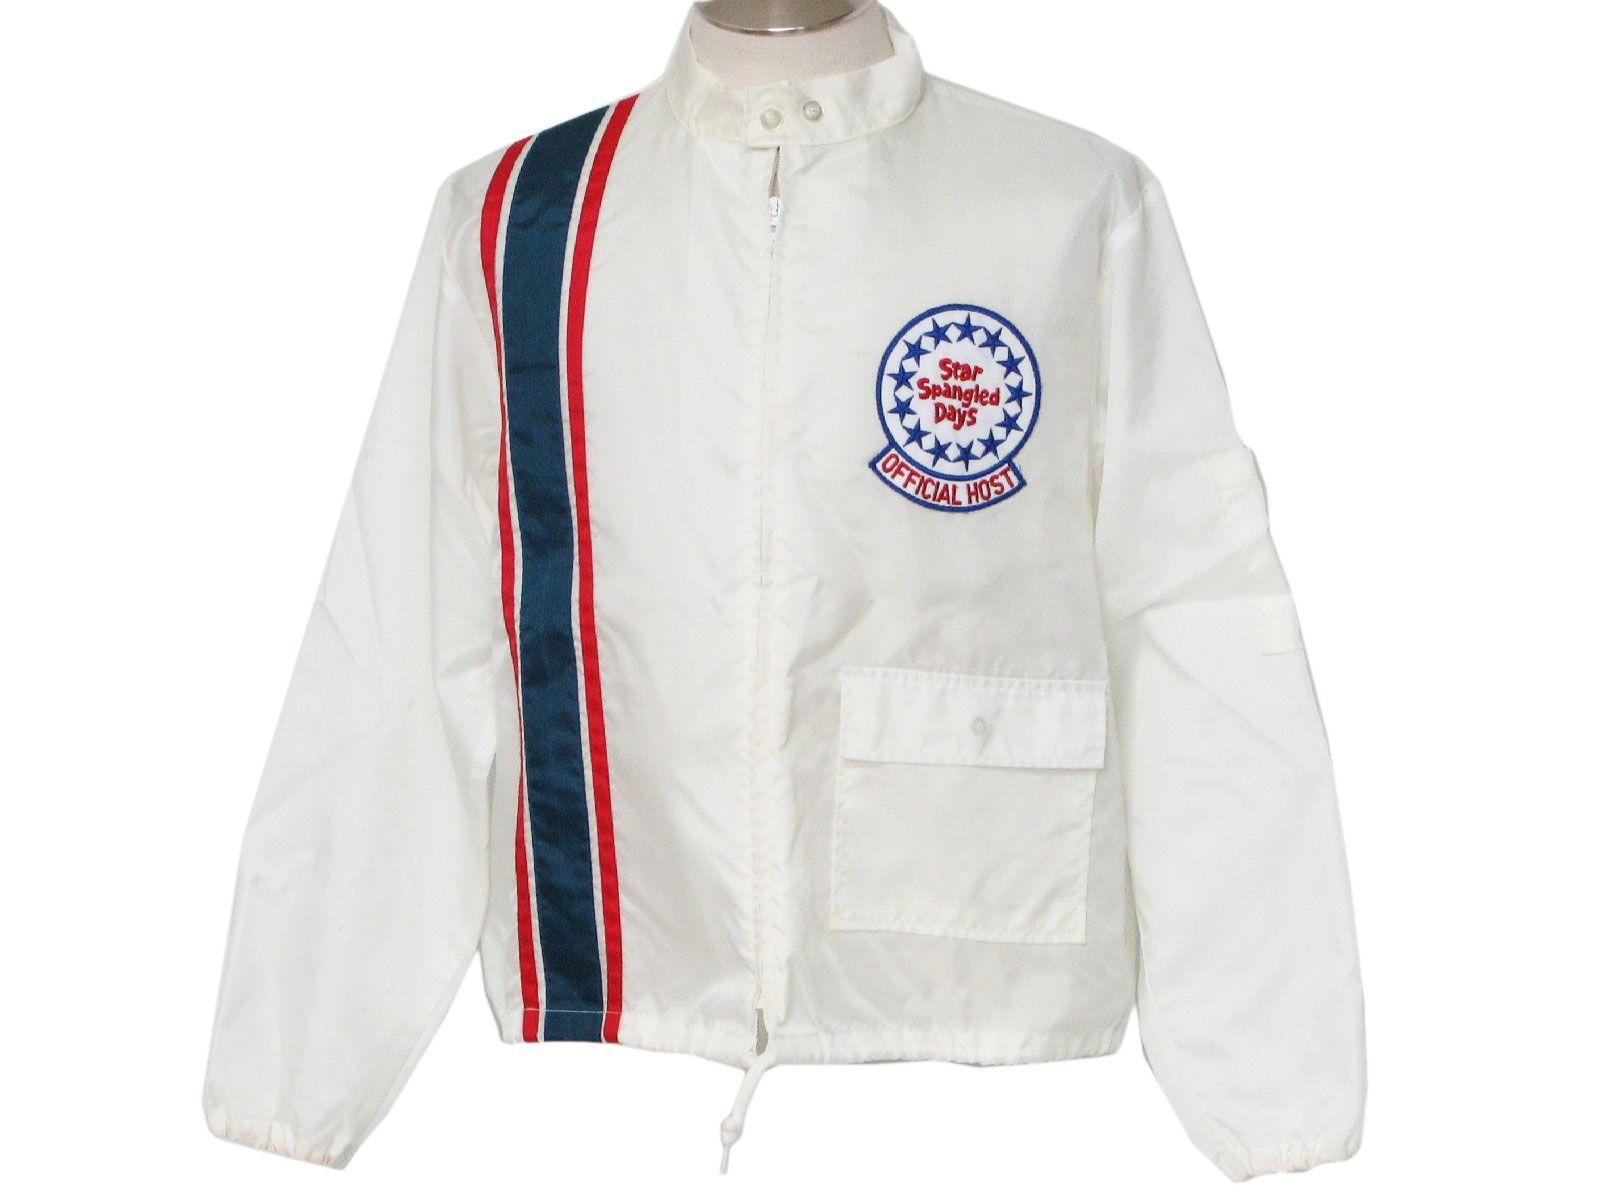 80s Clothing and Apparel Logo - Vintage Elin Racing Apparel 1980s Jacket: 80s -Elin Racing Apparel ...